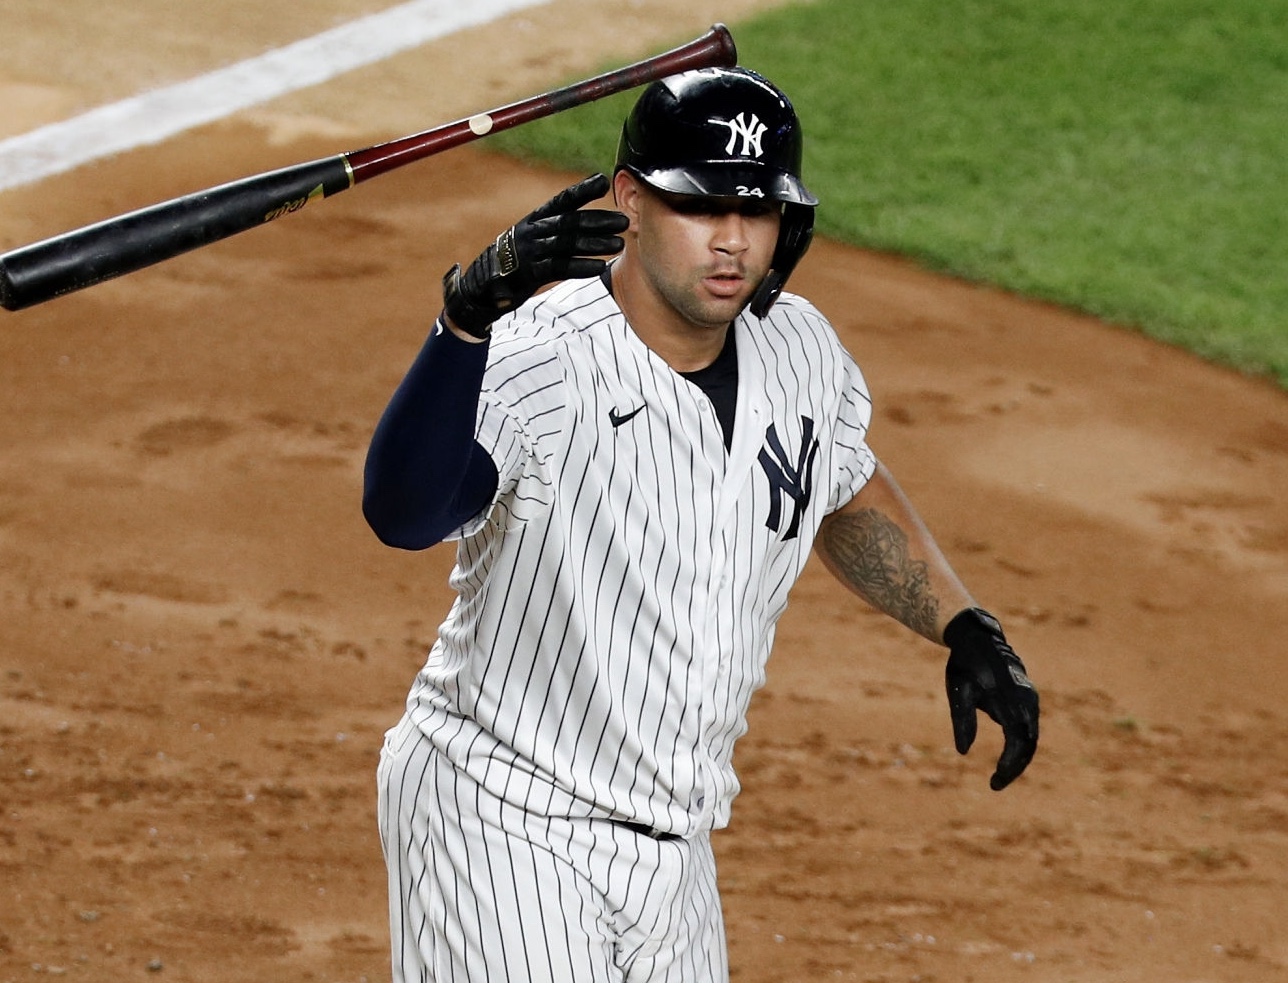 Gary Sanchez powers a grand salami for the Yankees in the clutch.